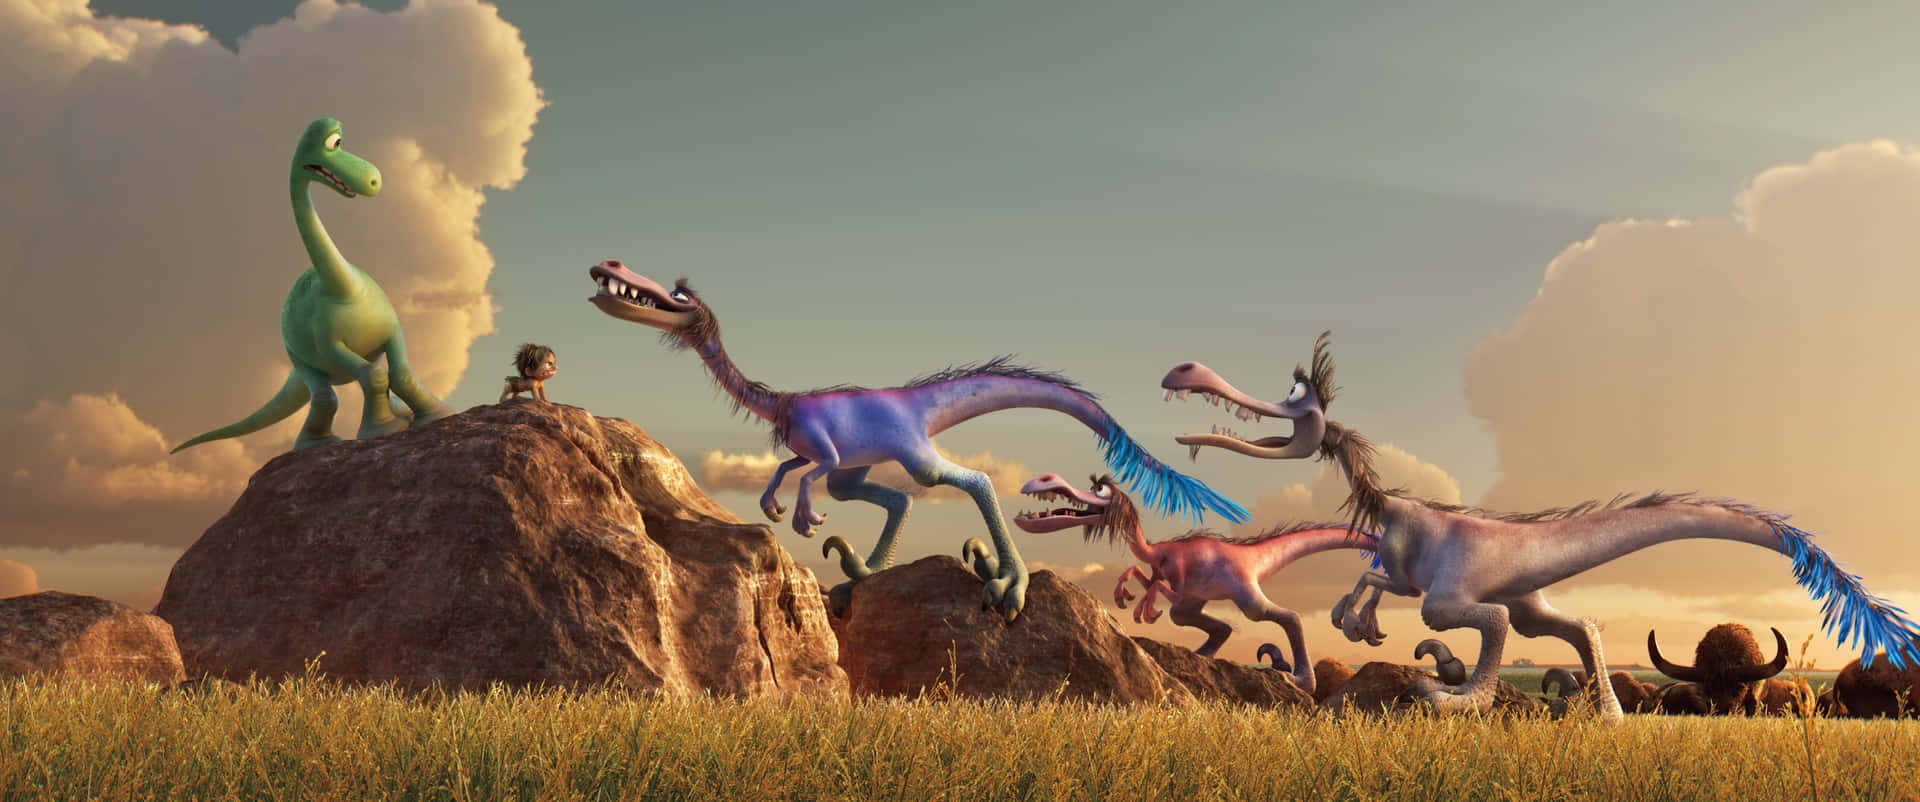 Majestic View Of Dinosaurs Roaming In The Wilderness